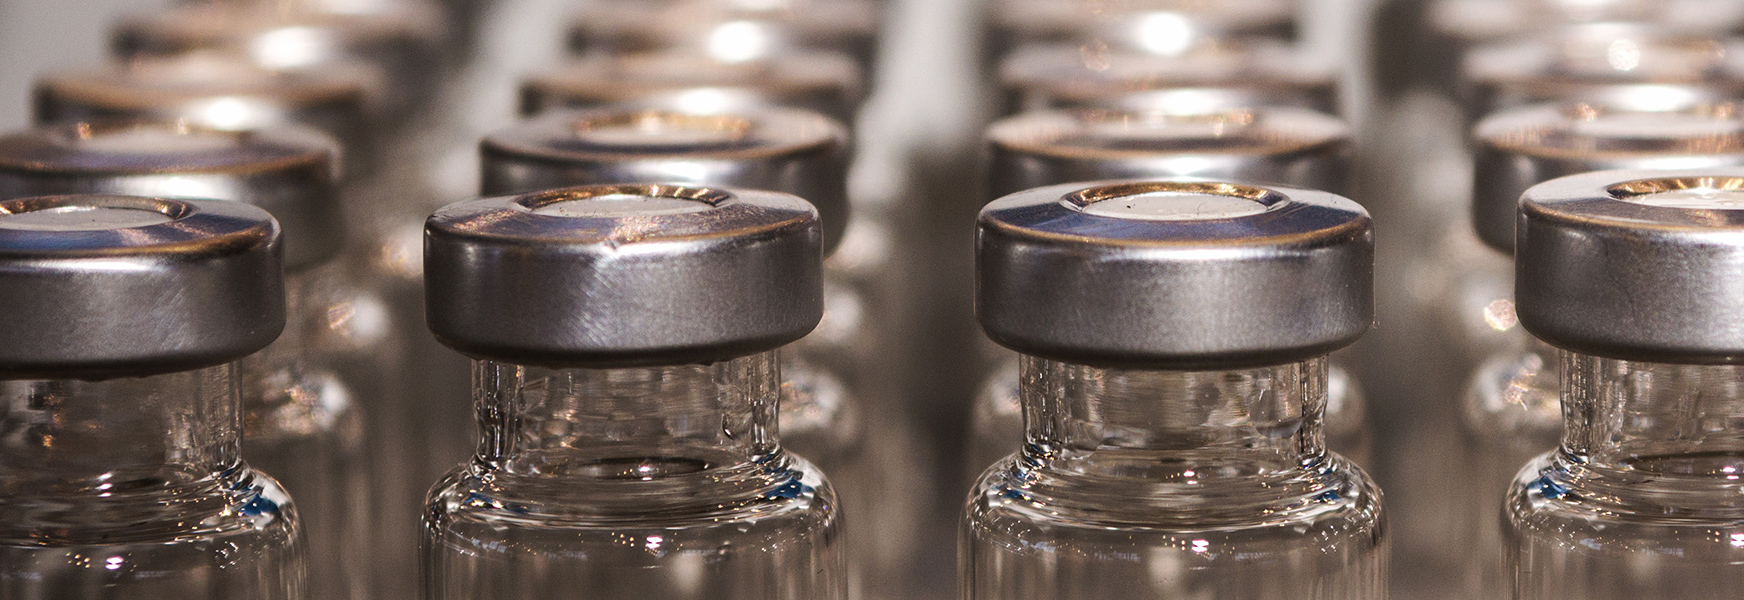 Empty vaccine bottles exiting production line